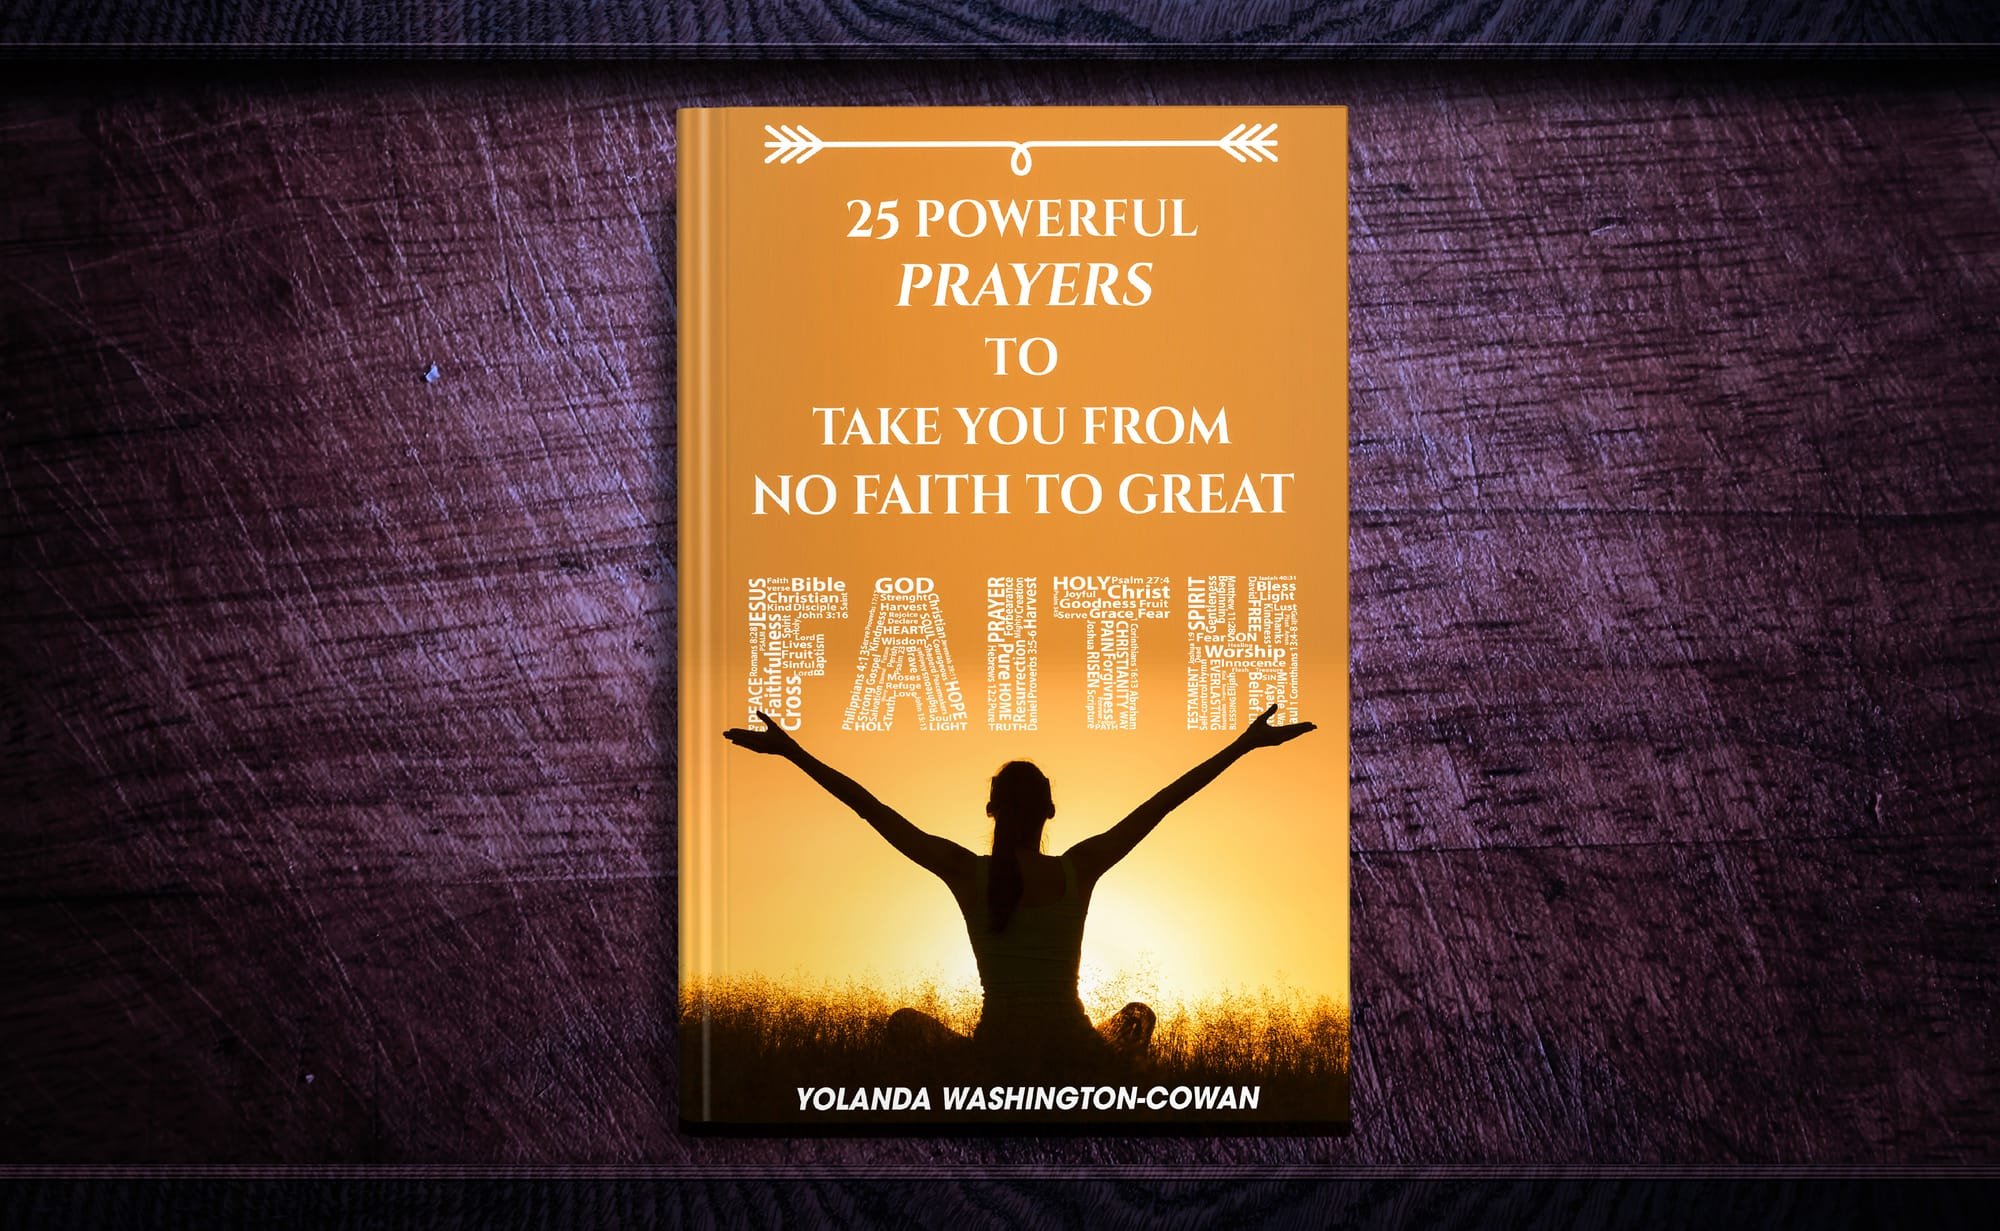 25 Powerful Prayers to Take you from No Faith to Great Faith available in Ebook, Hard Copy and Audible